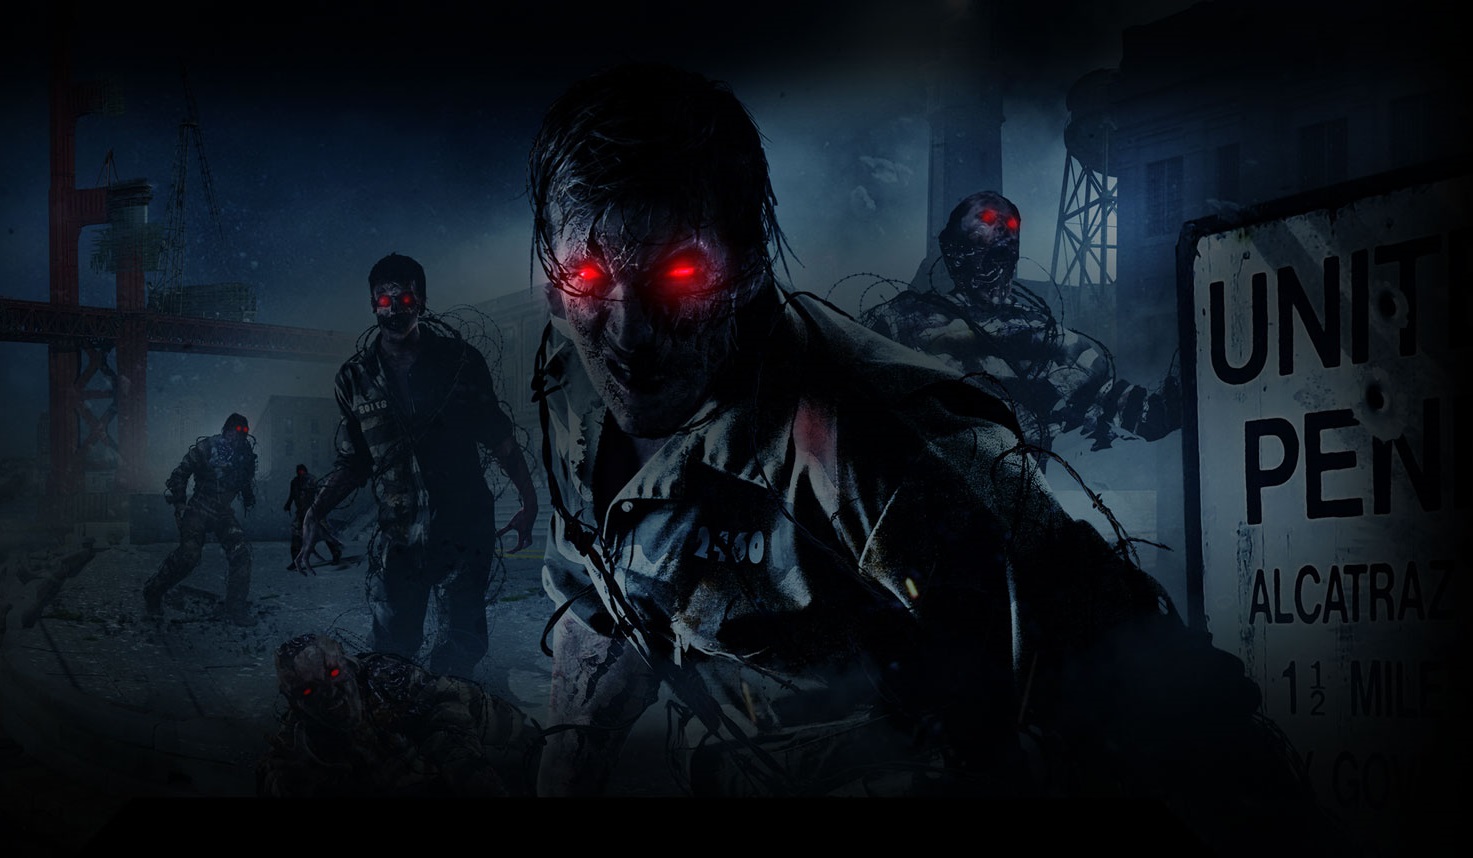  Duty Ghosts Zombies HD Wallpaper And Free Download Wallpaper GamesHD